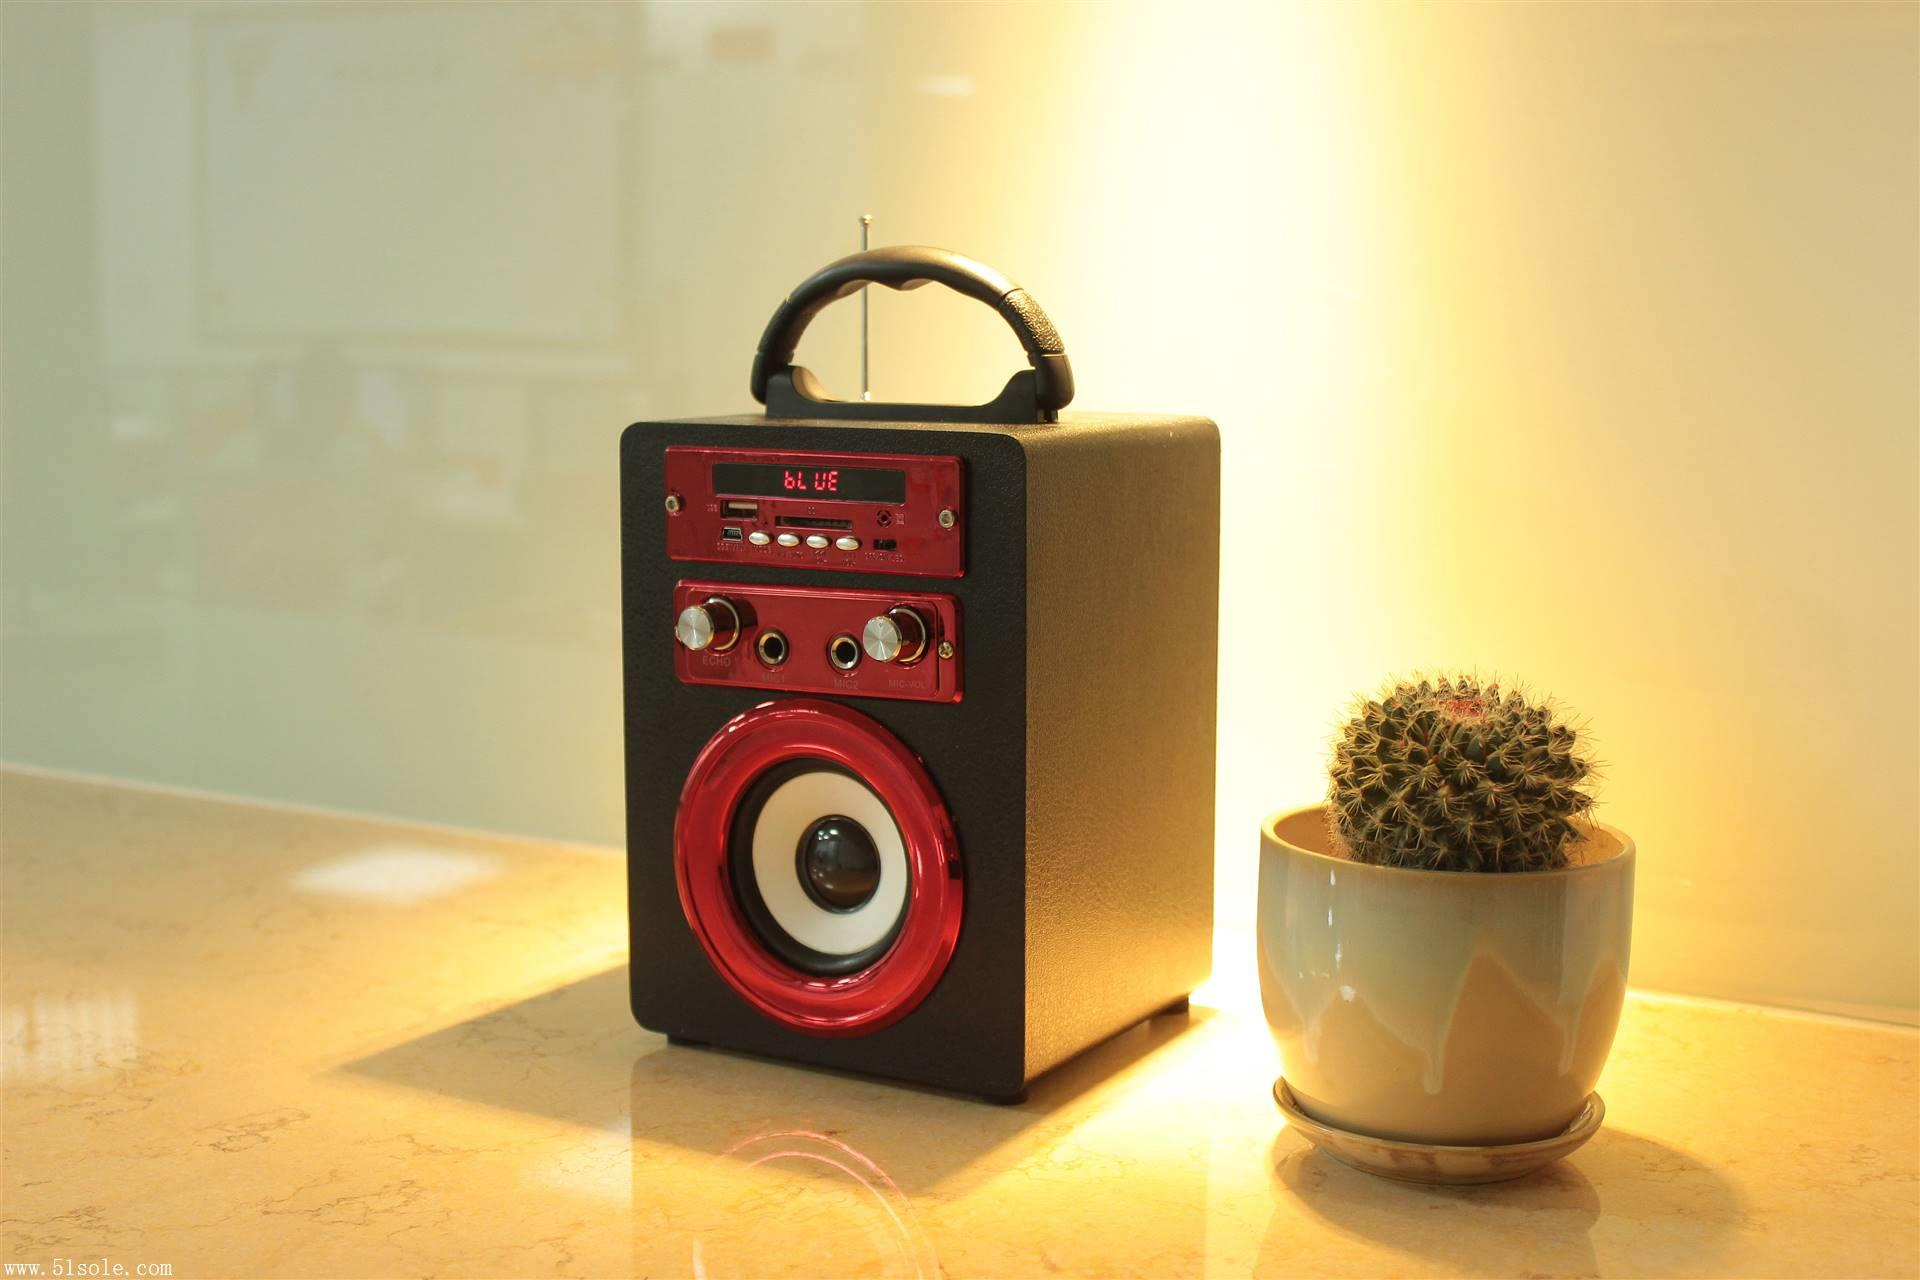 In 2024, the new wireless speaker with FM radio, record player, and portable design exudes a warm ambiance, creating a delightful atmosphere next to the cactus.